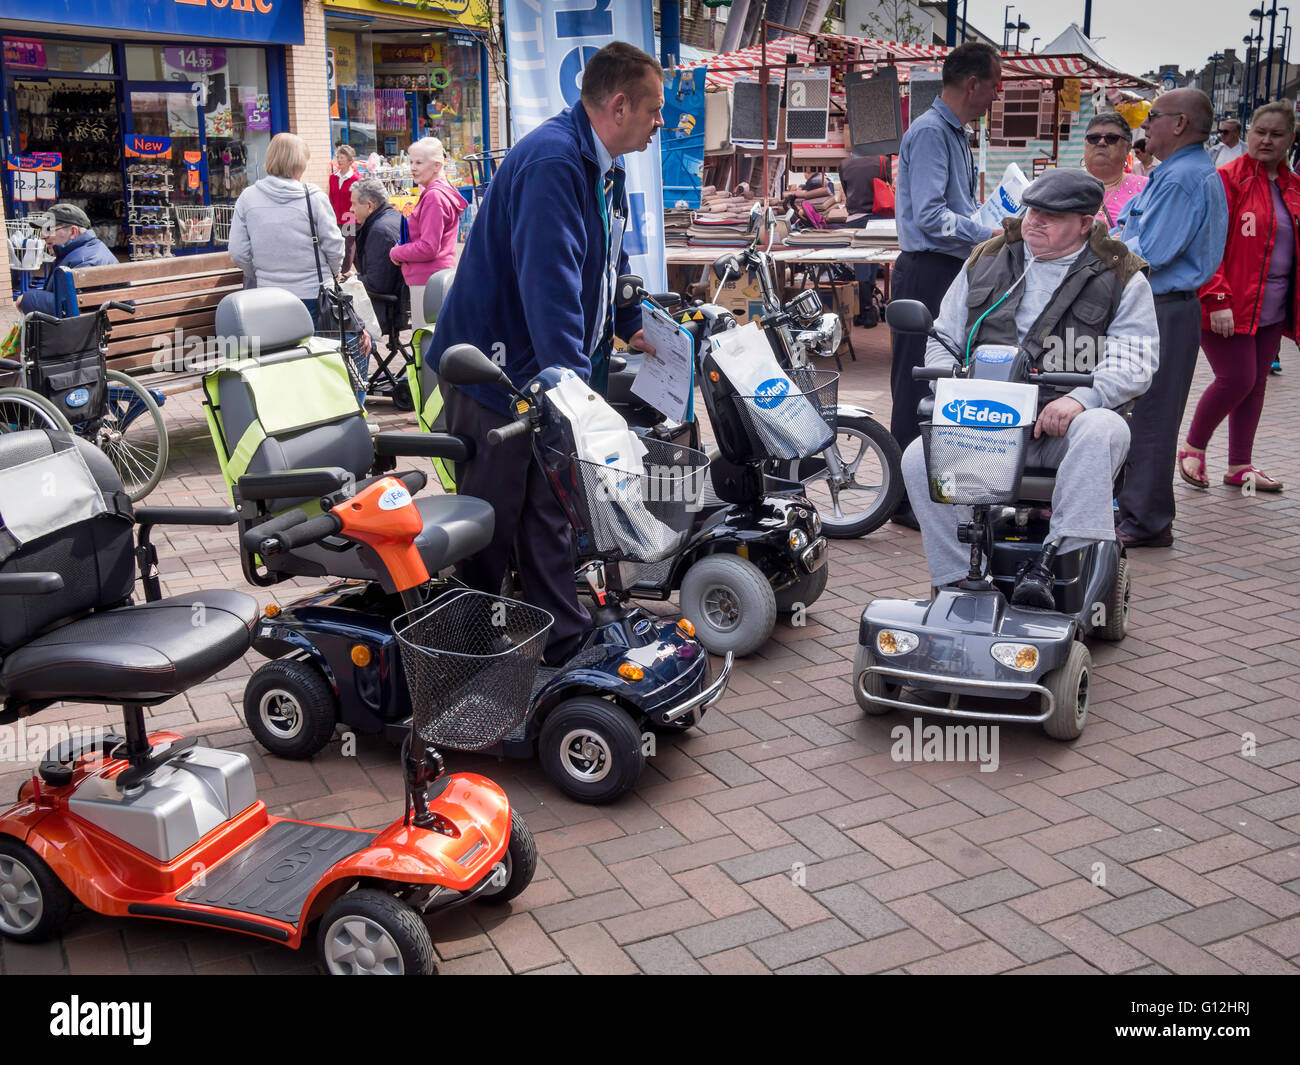 Display of Mobility Scooters for disabled people at the Weekly Market in Redcar Cleveland salesman talking to a scooter user Stock Photo